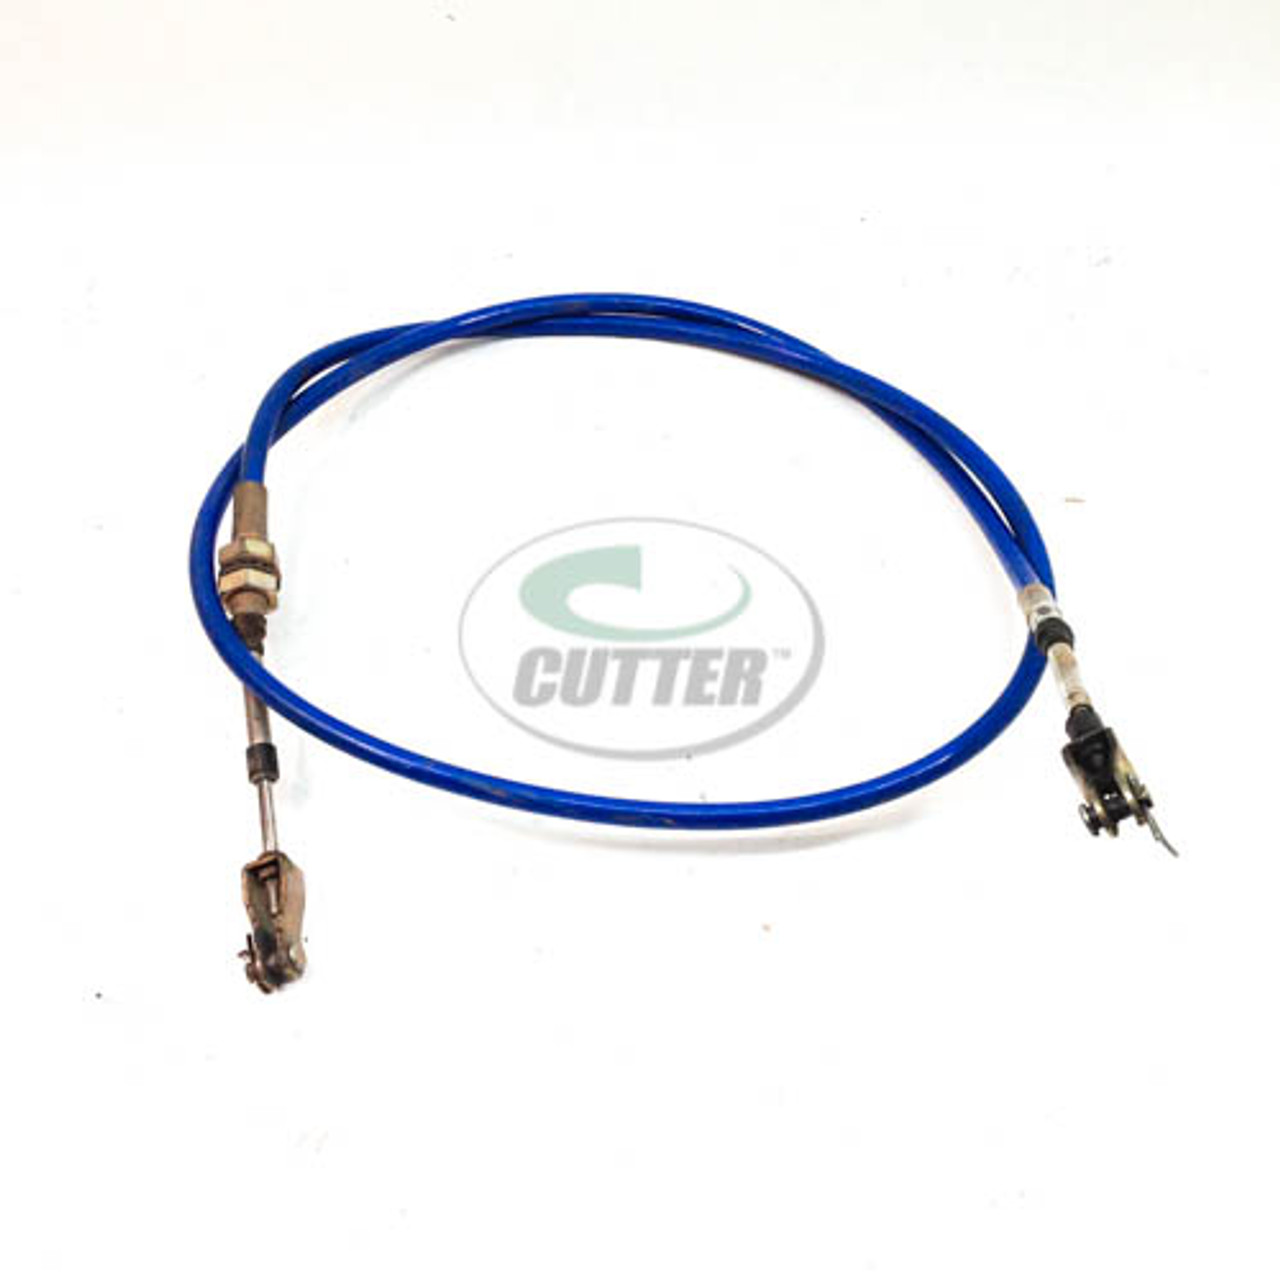 Toro Used Gear Shift Cable - 87-4260